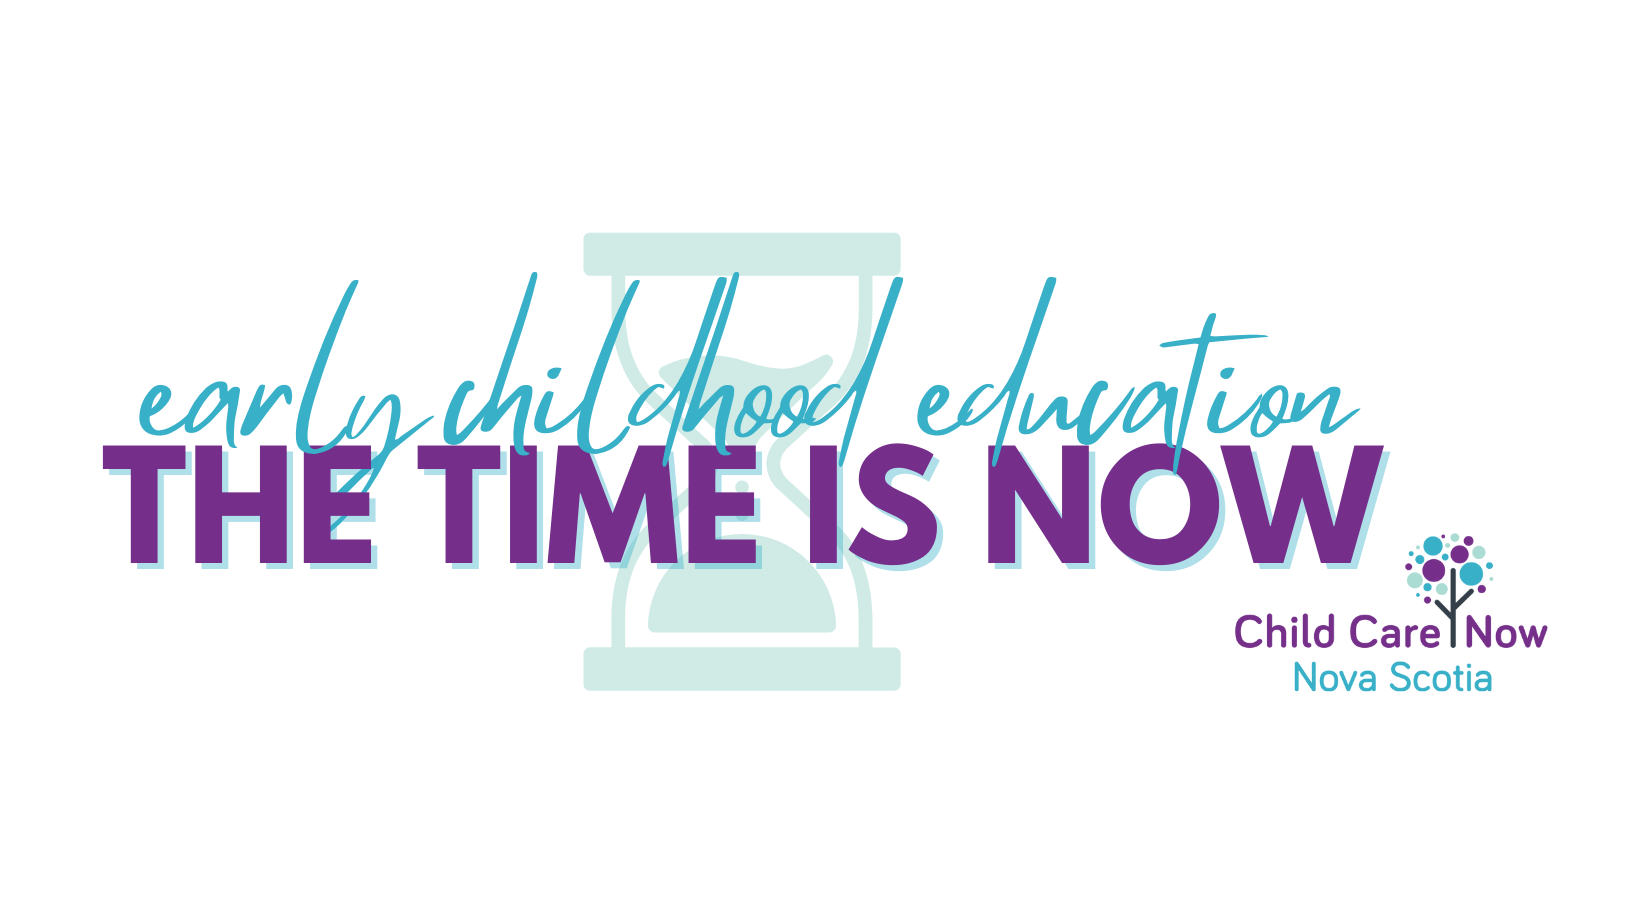 On a white background with the animated graphic of an hour glass, text reads "Early childhood education. The time is now." At the bottom right corner is the logo of Child Care Now Nova Scotia.